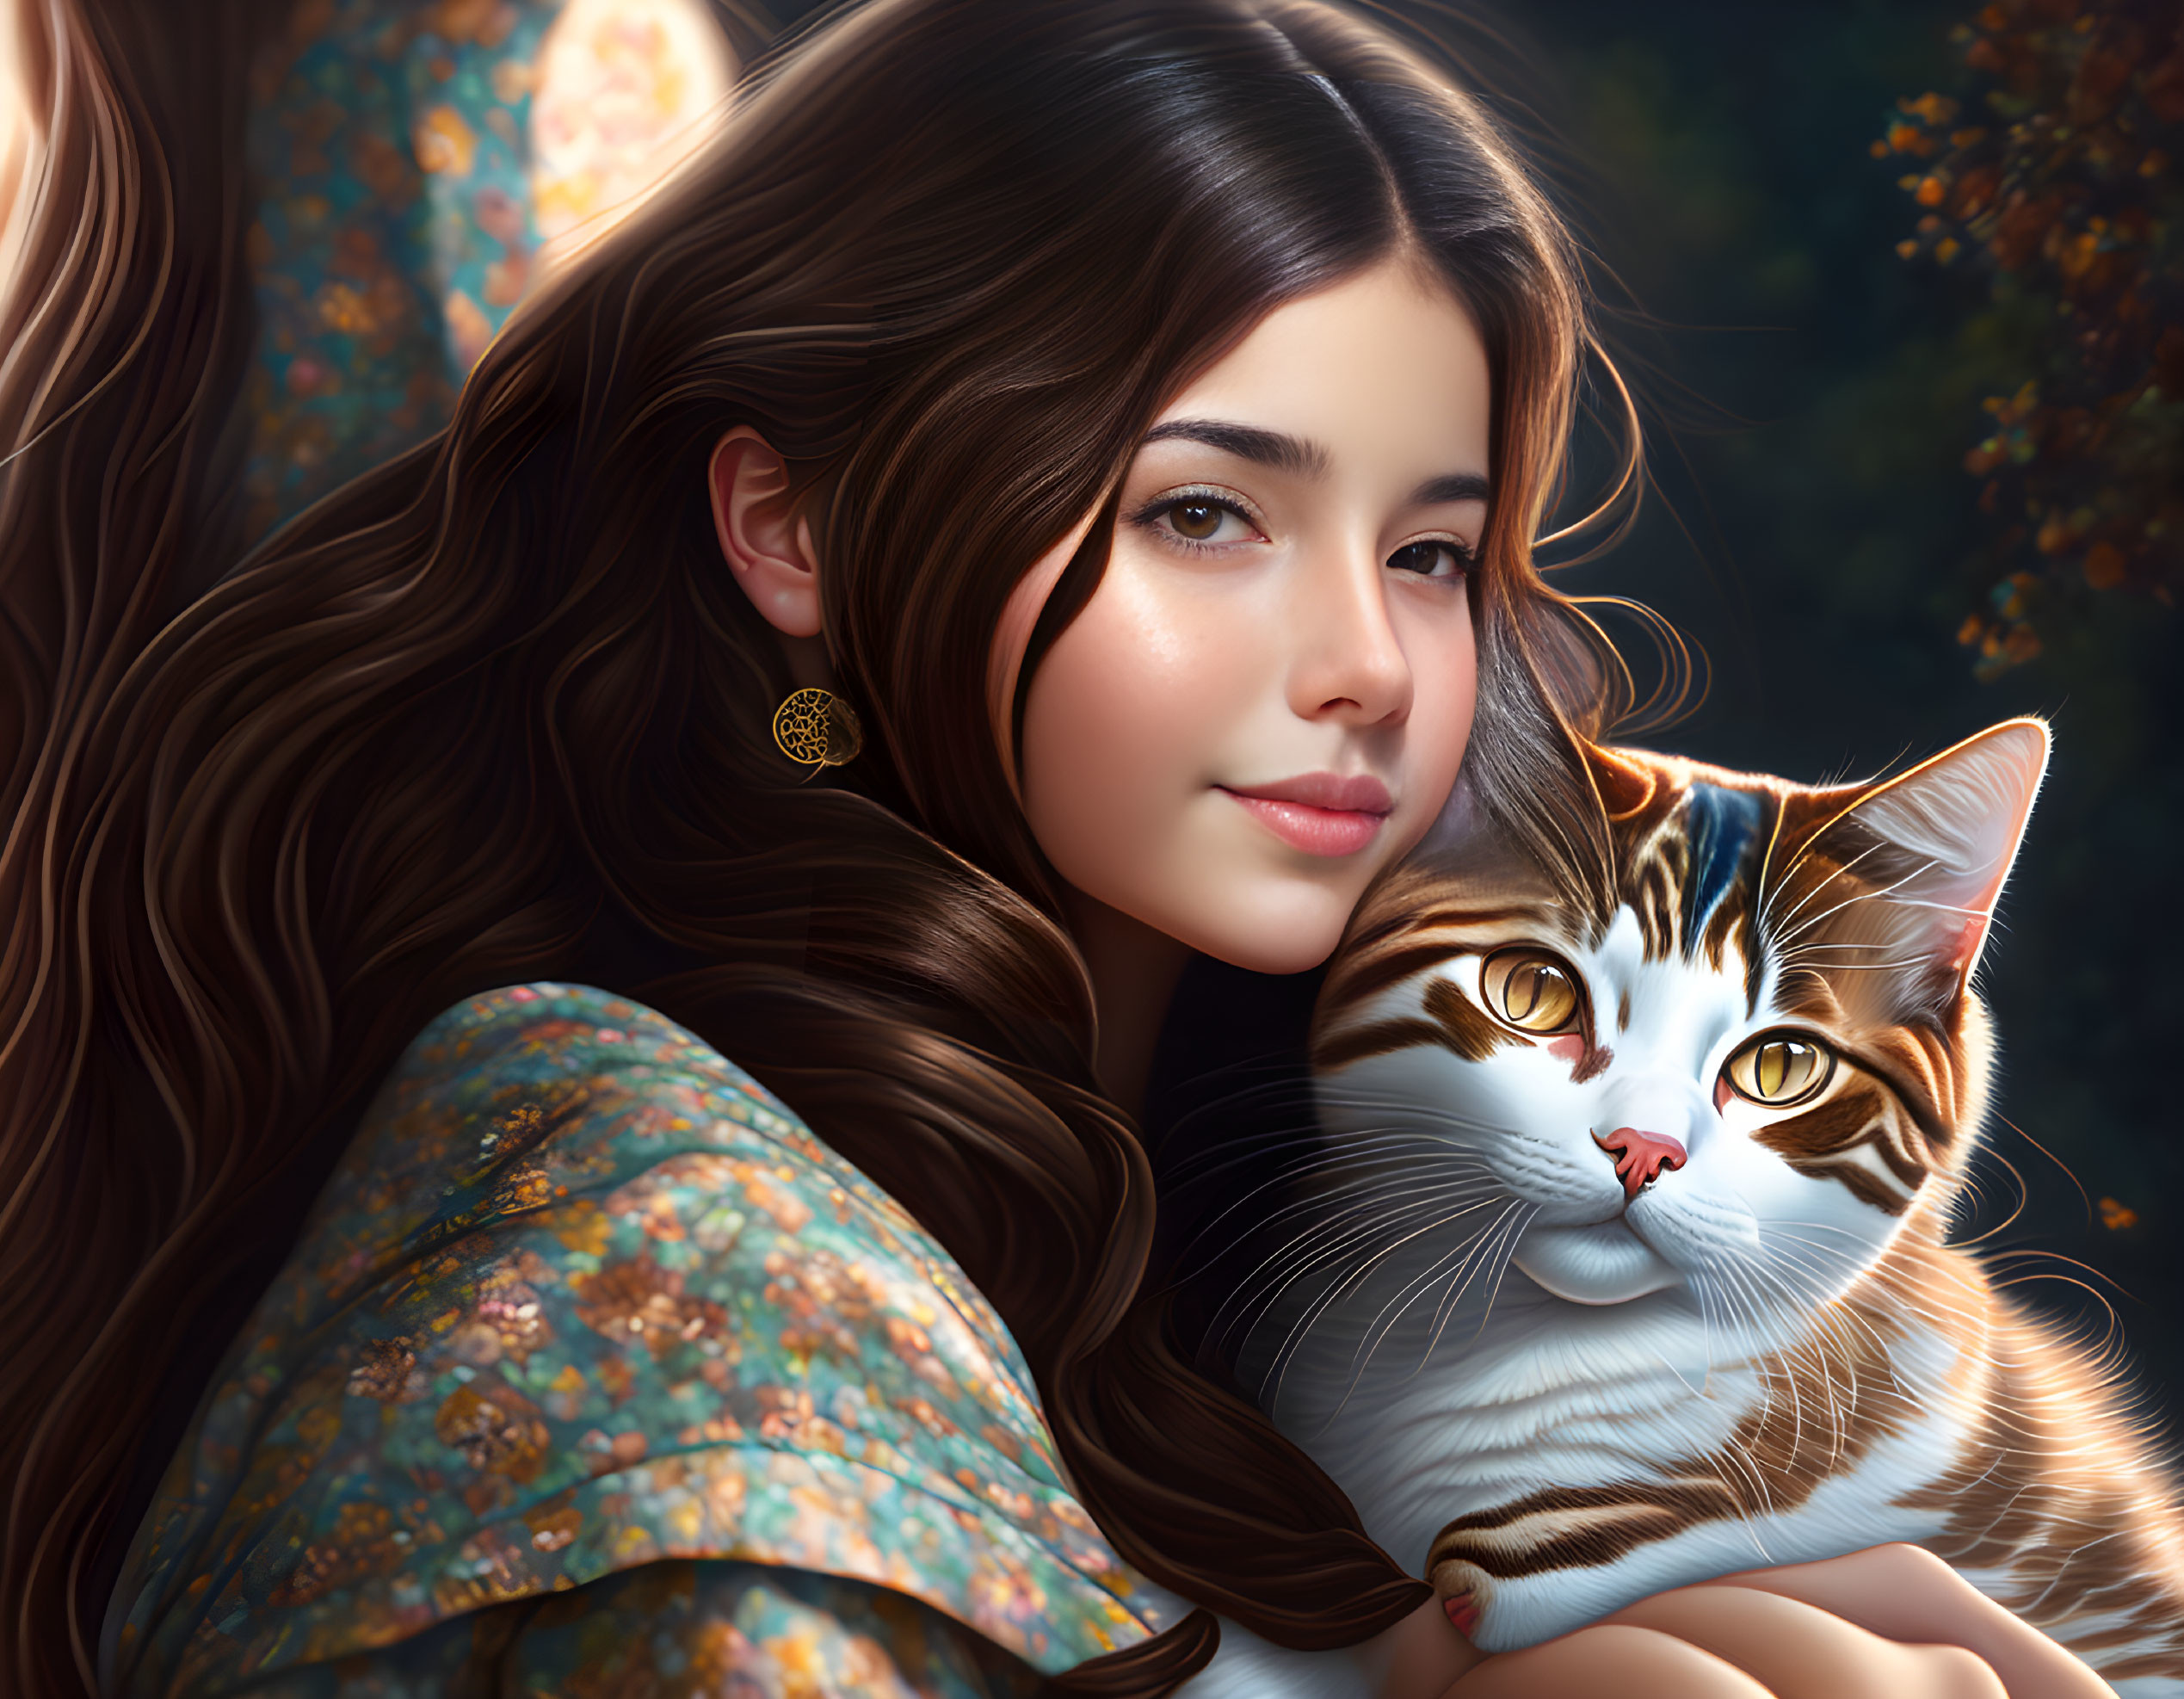 Woman with Long, Wavy Hair Holding Striped Cat in Serene Setting